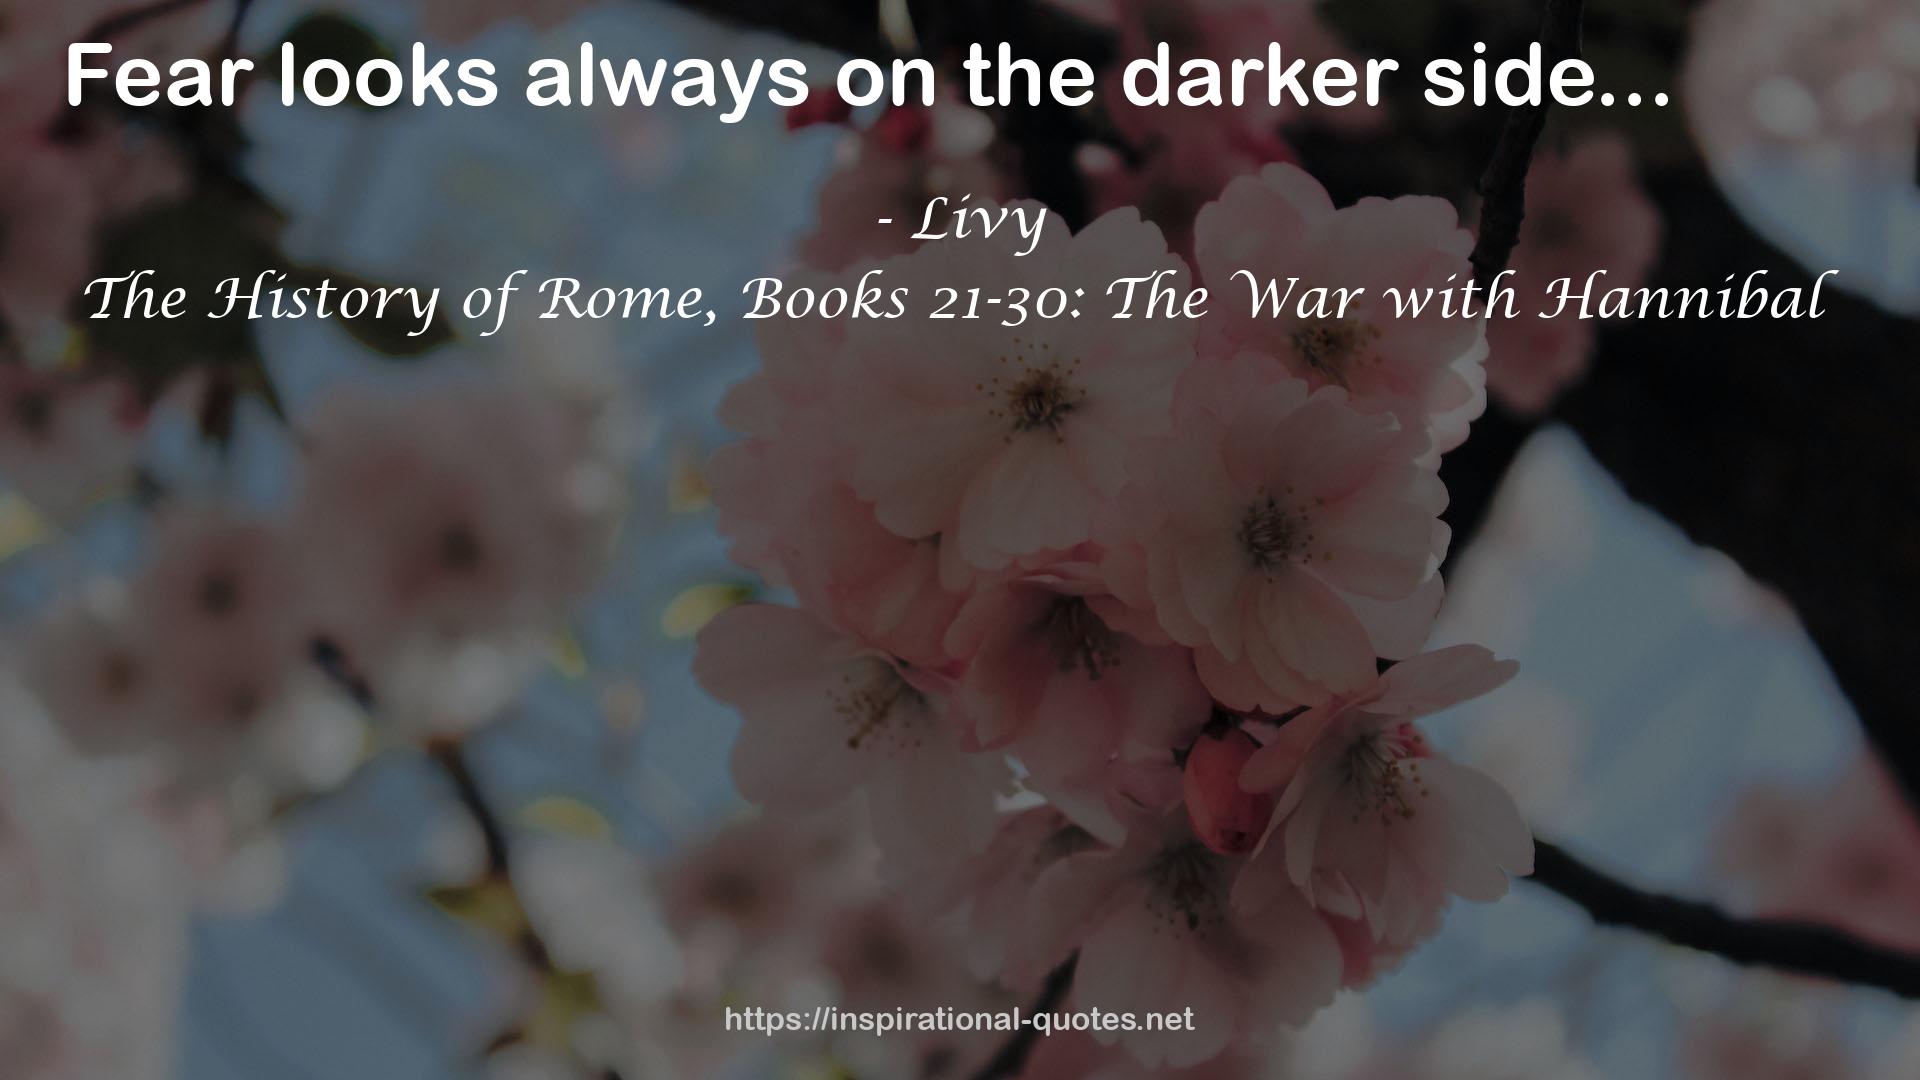 The History of Rome, Books 21-30: The War with Hannibal QUOTES